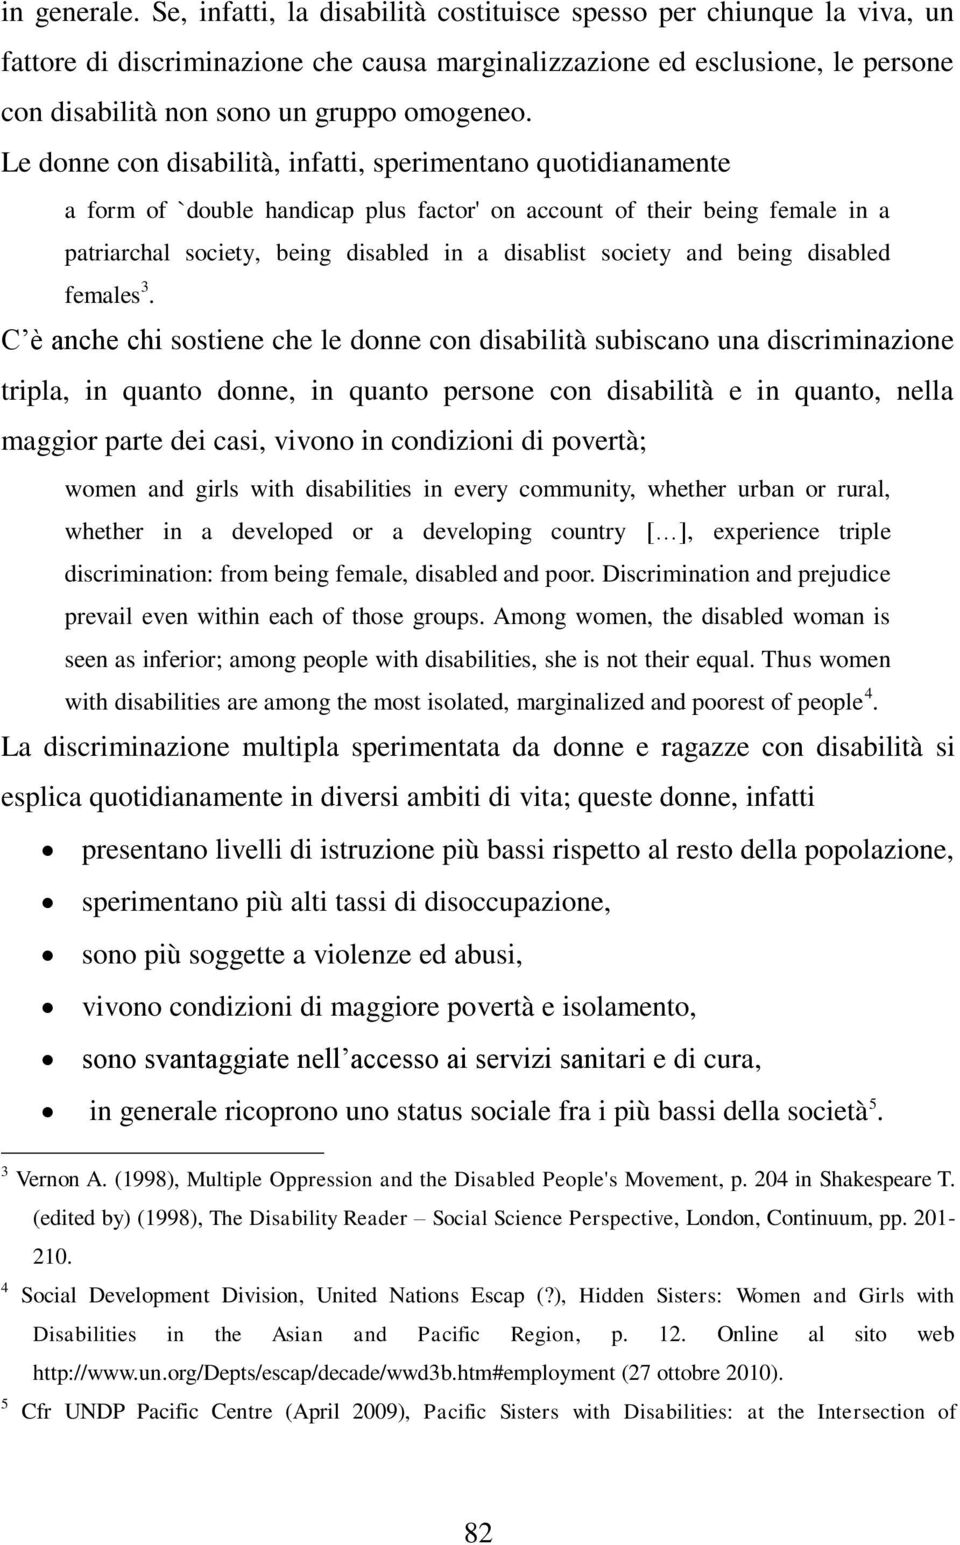 Le donne con disabilità, infatti, sperimentano quotidianamente a form of `double handicap plus factor' on account of their being female in a patriarchal society, being disabled in a disablist society